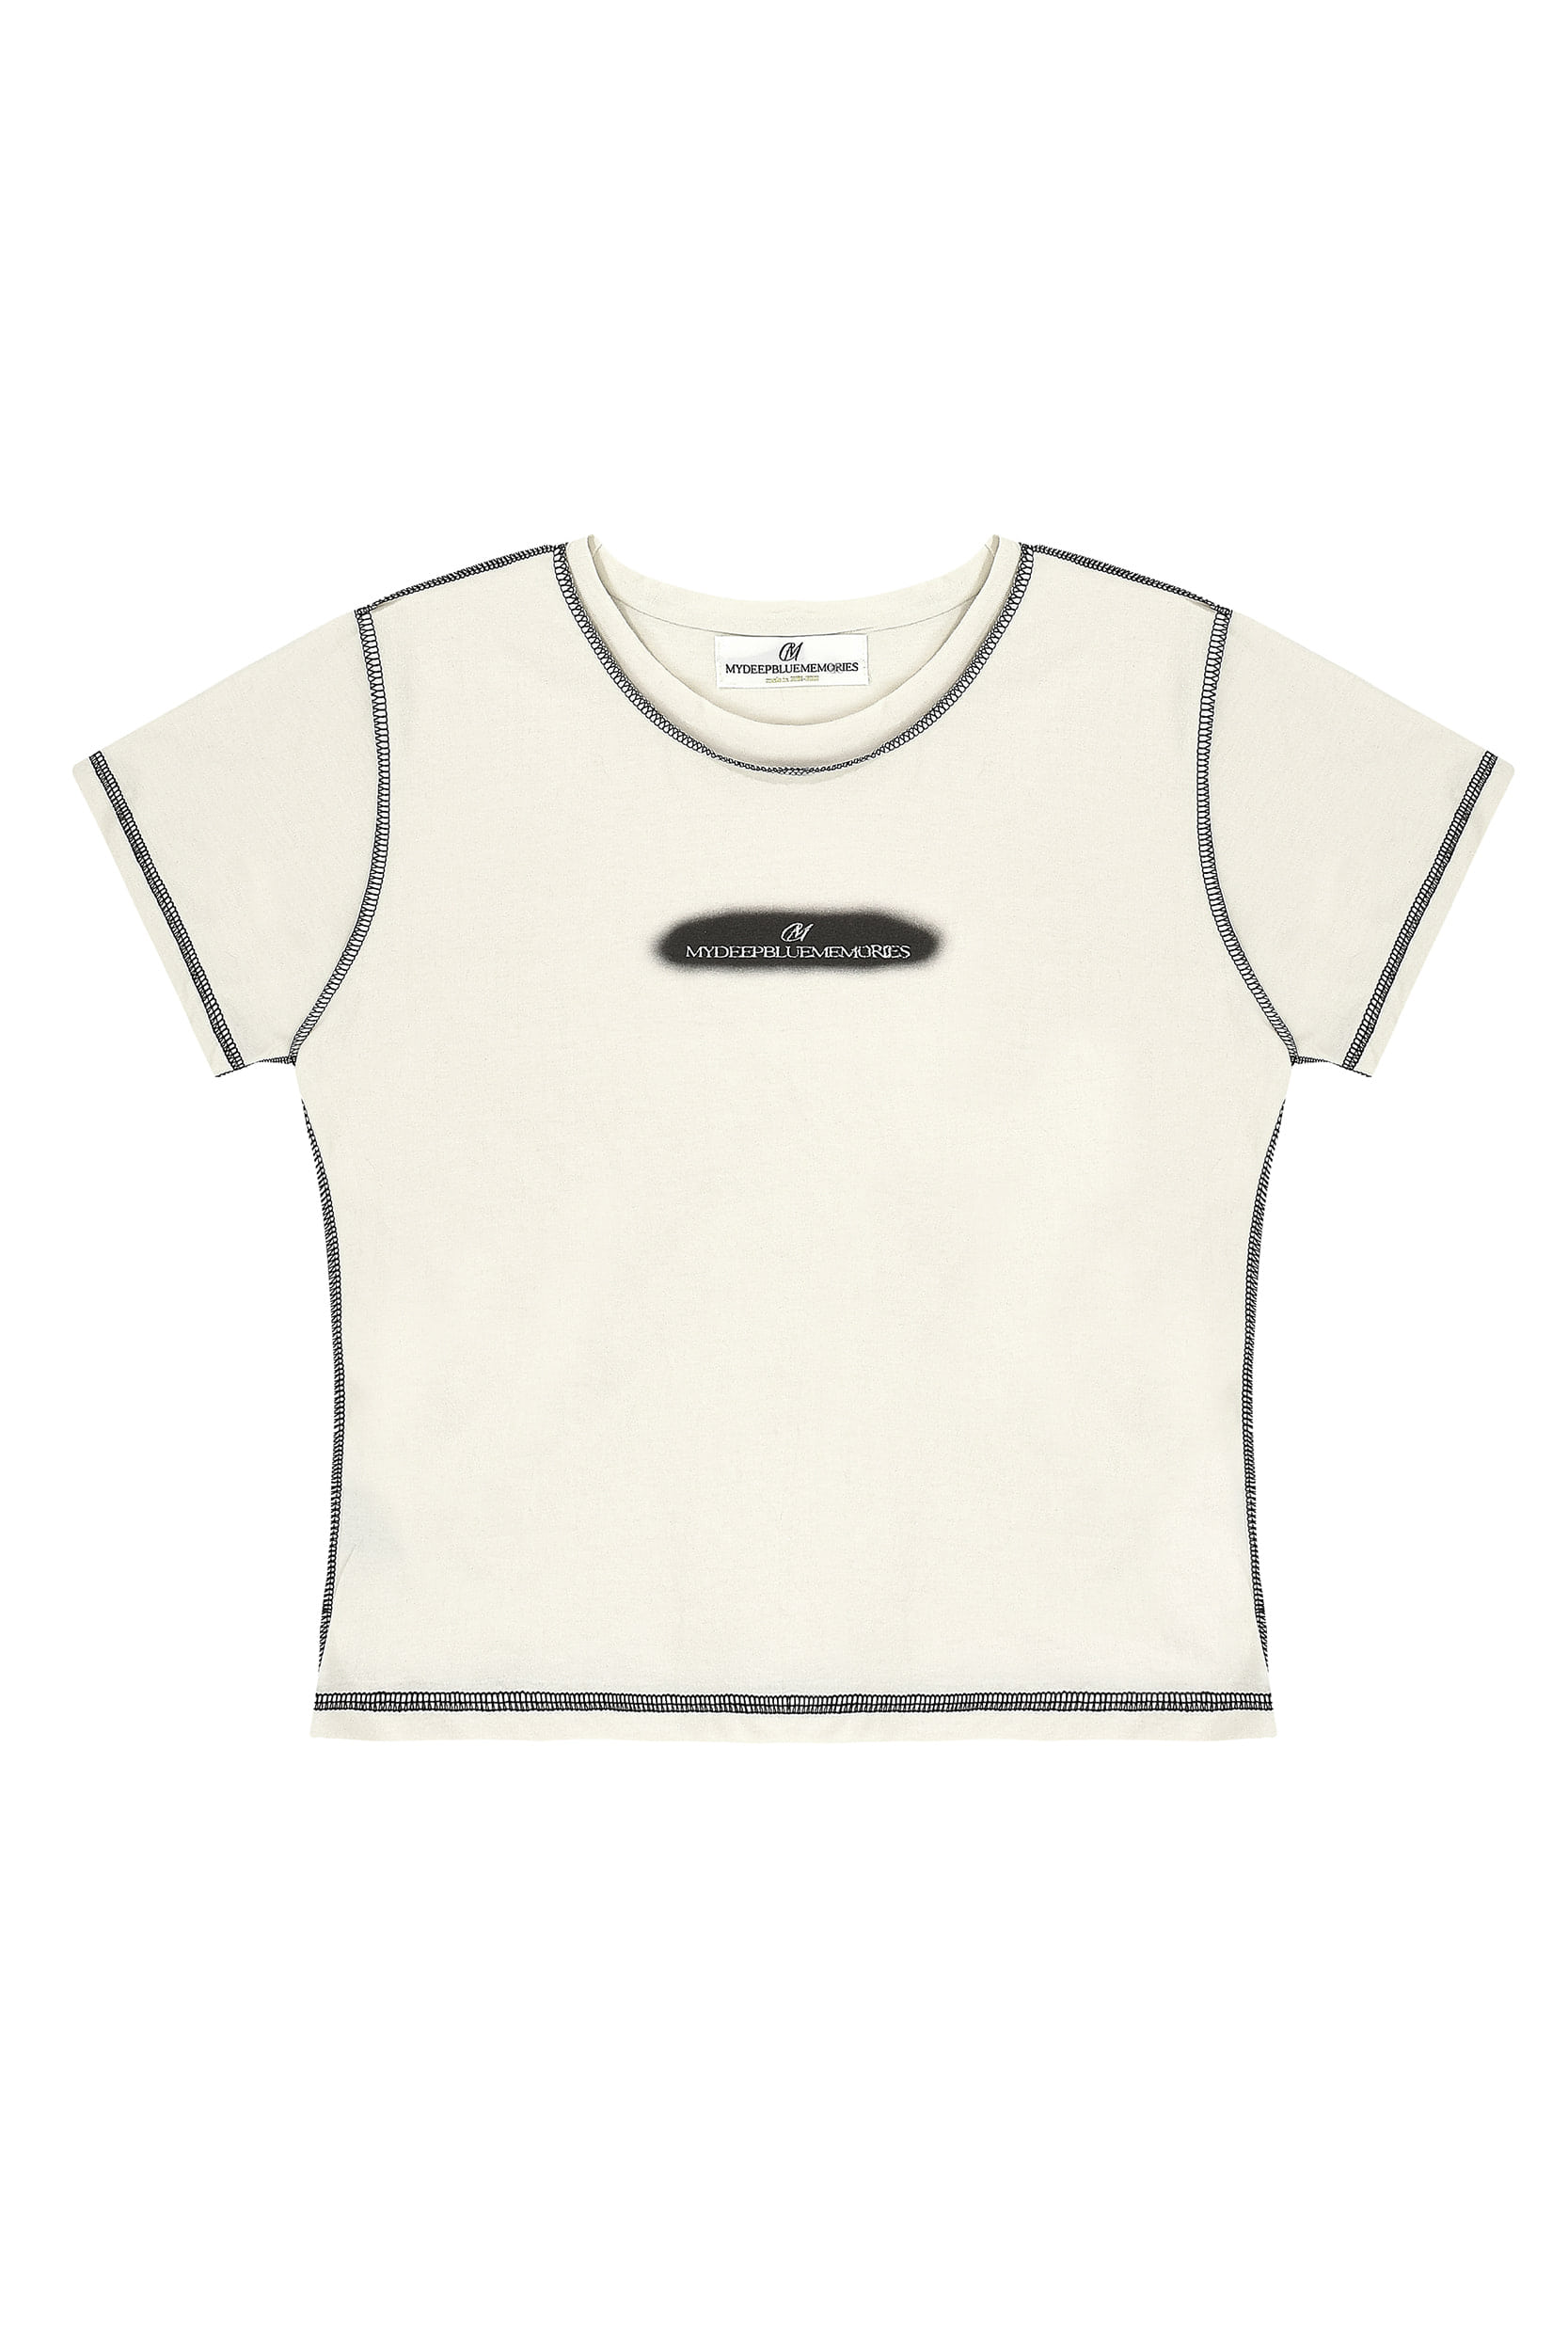 MM PRINTED STITCH CROP TEE in Ivory